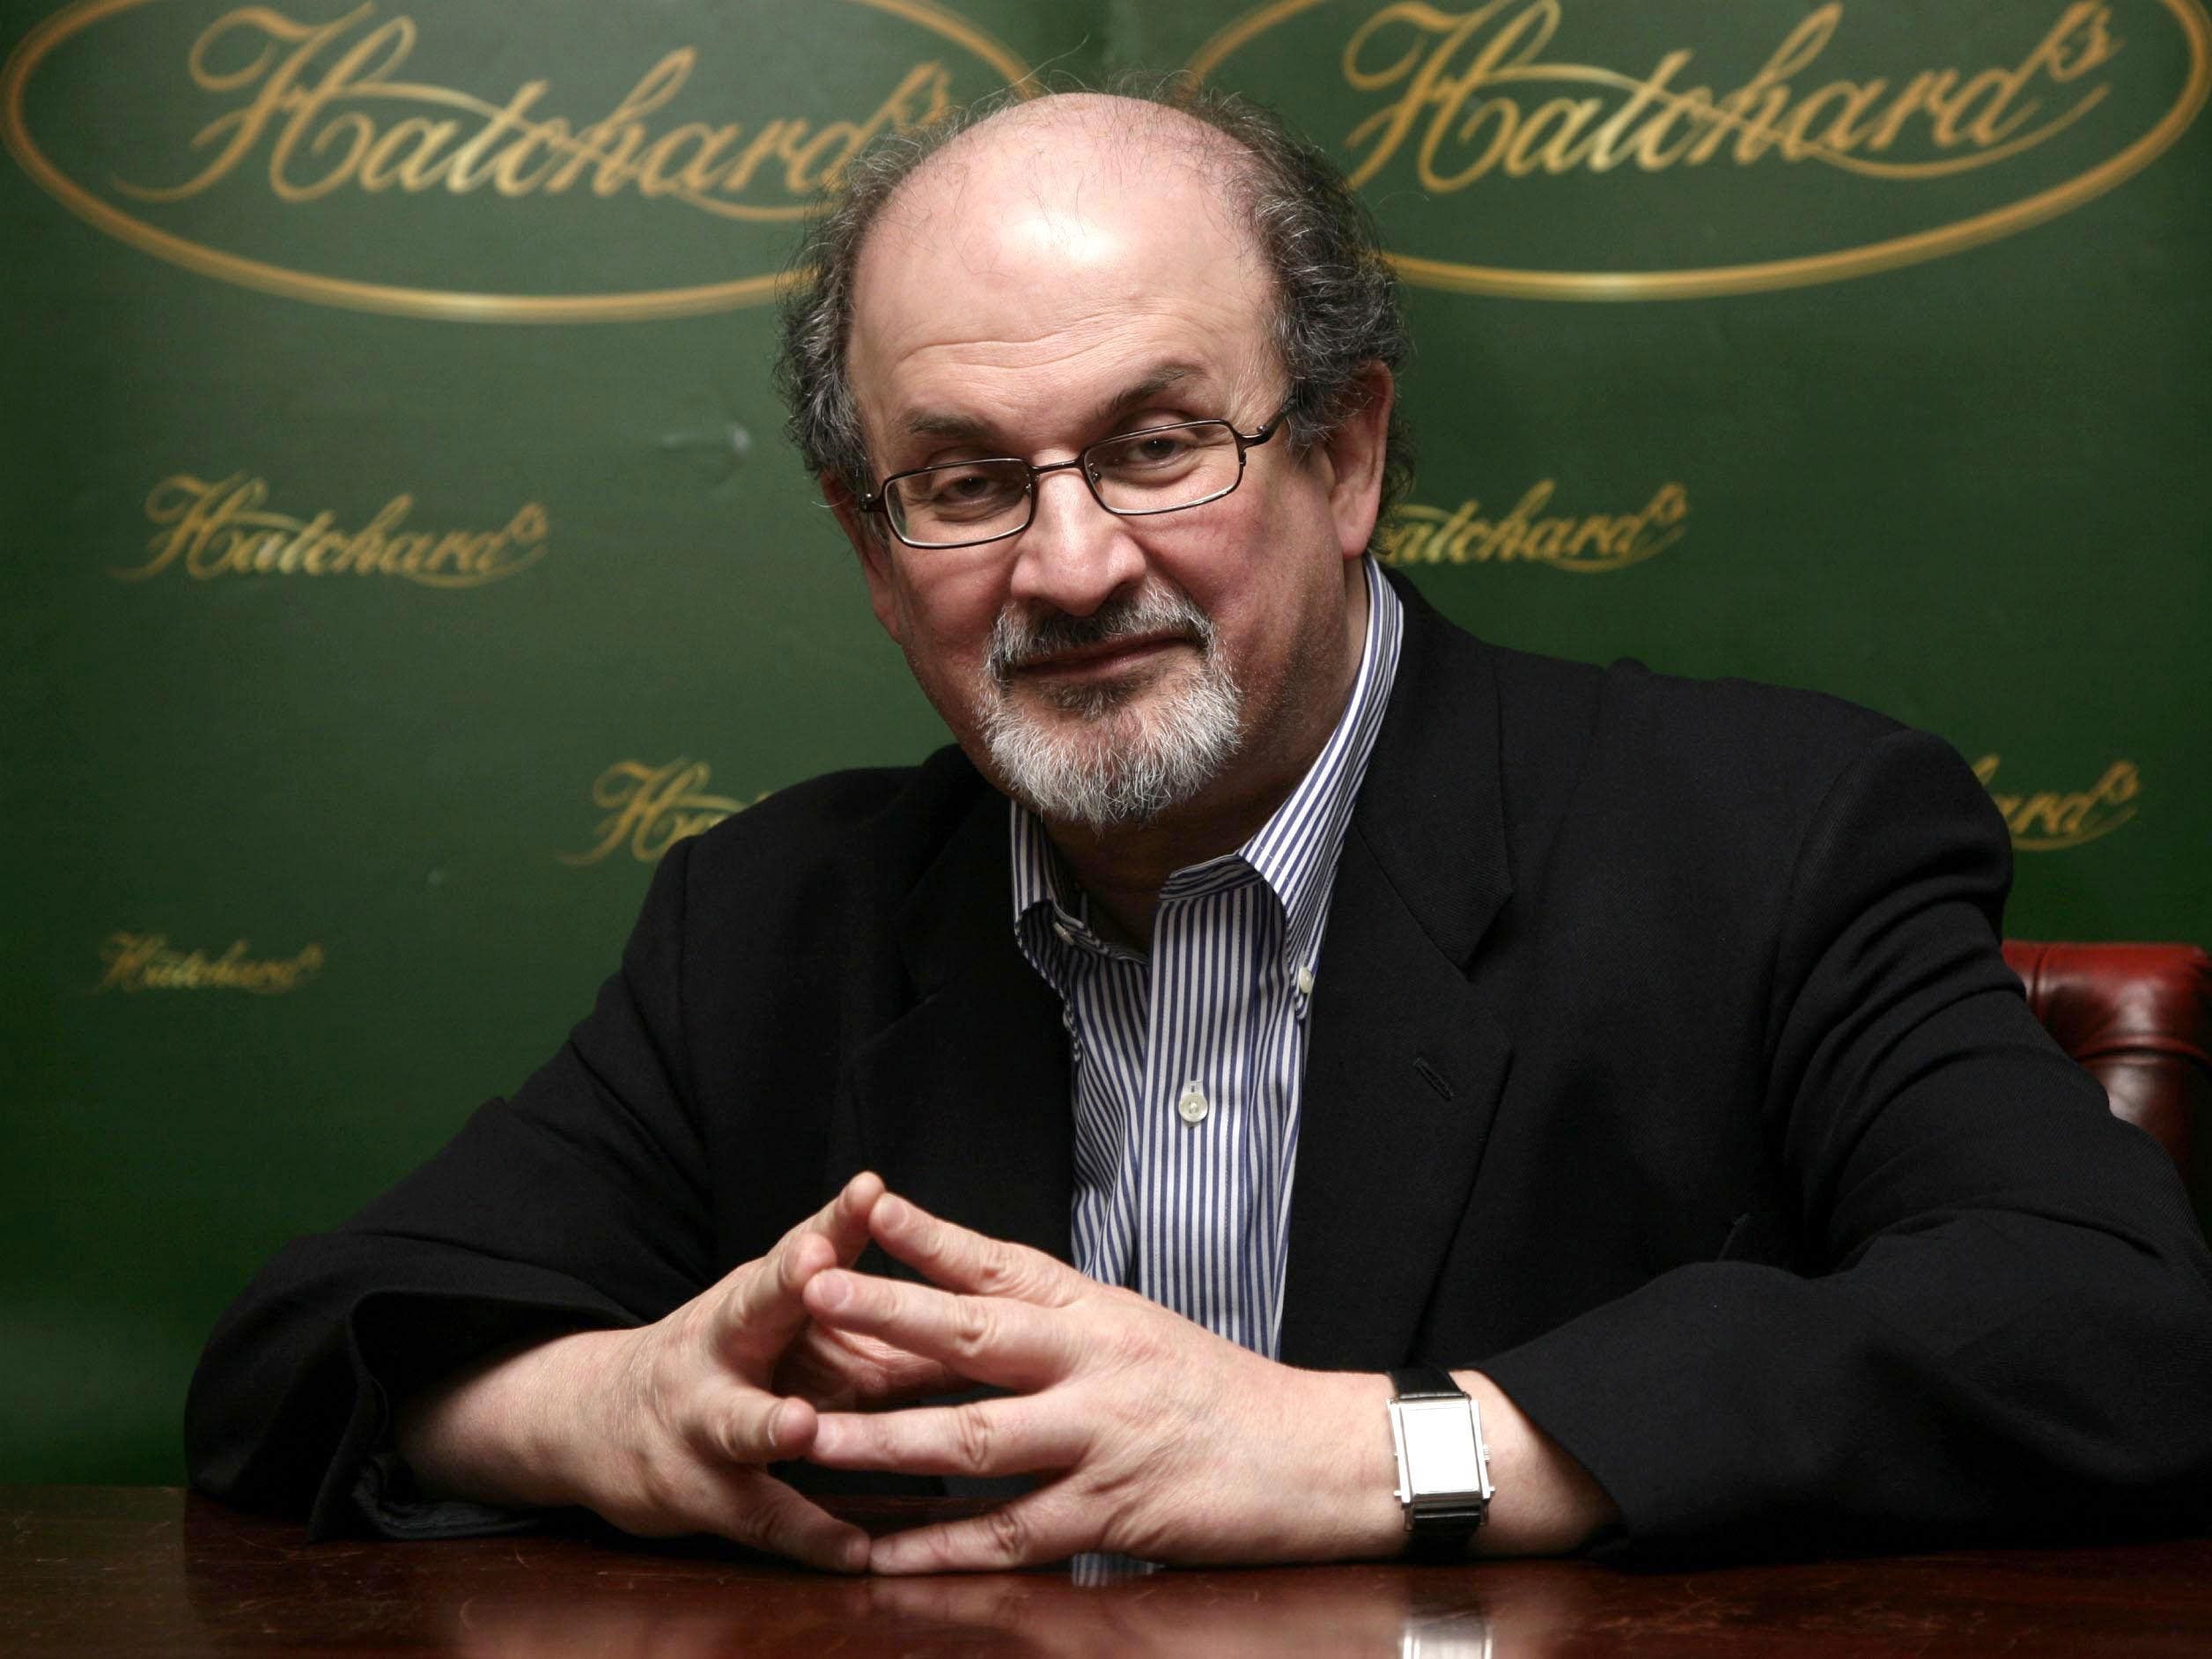 Man accused of stabbing Salman Rushdie charged with supporting terrorist group